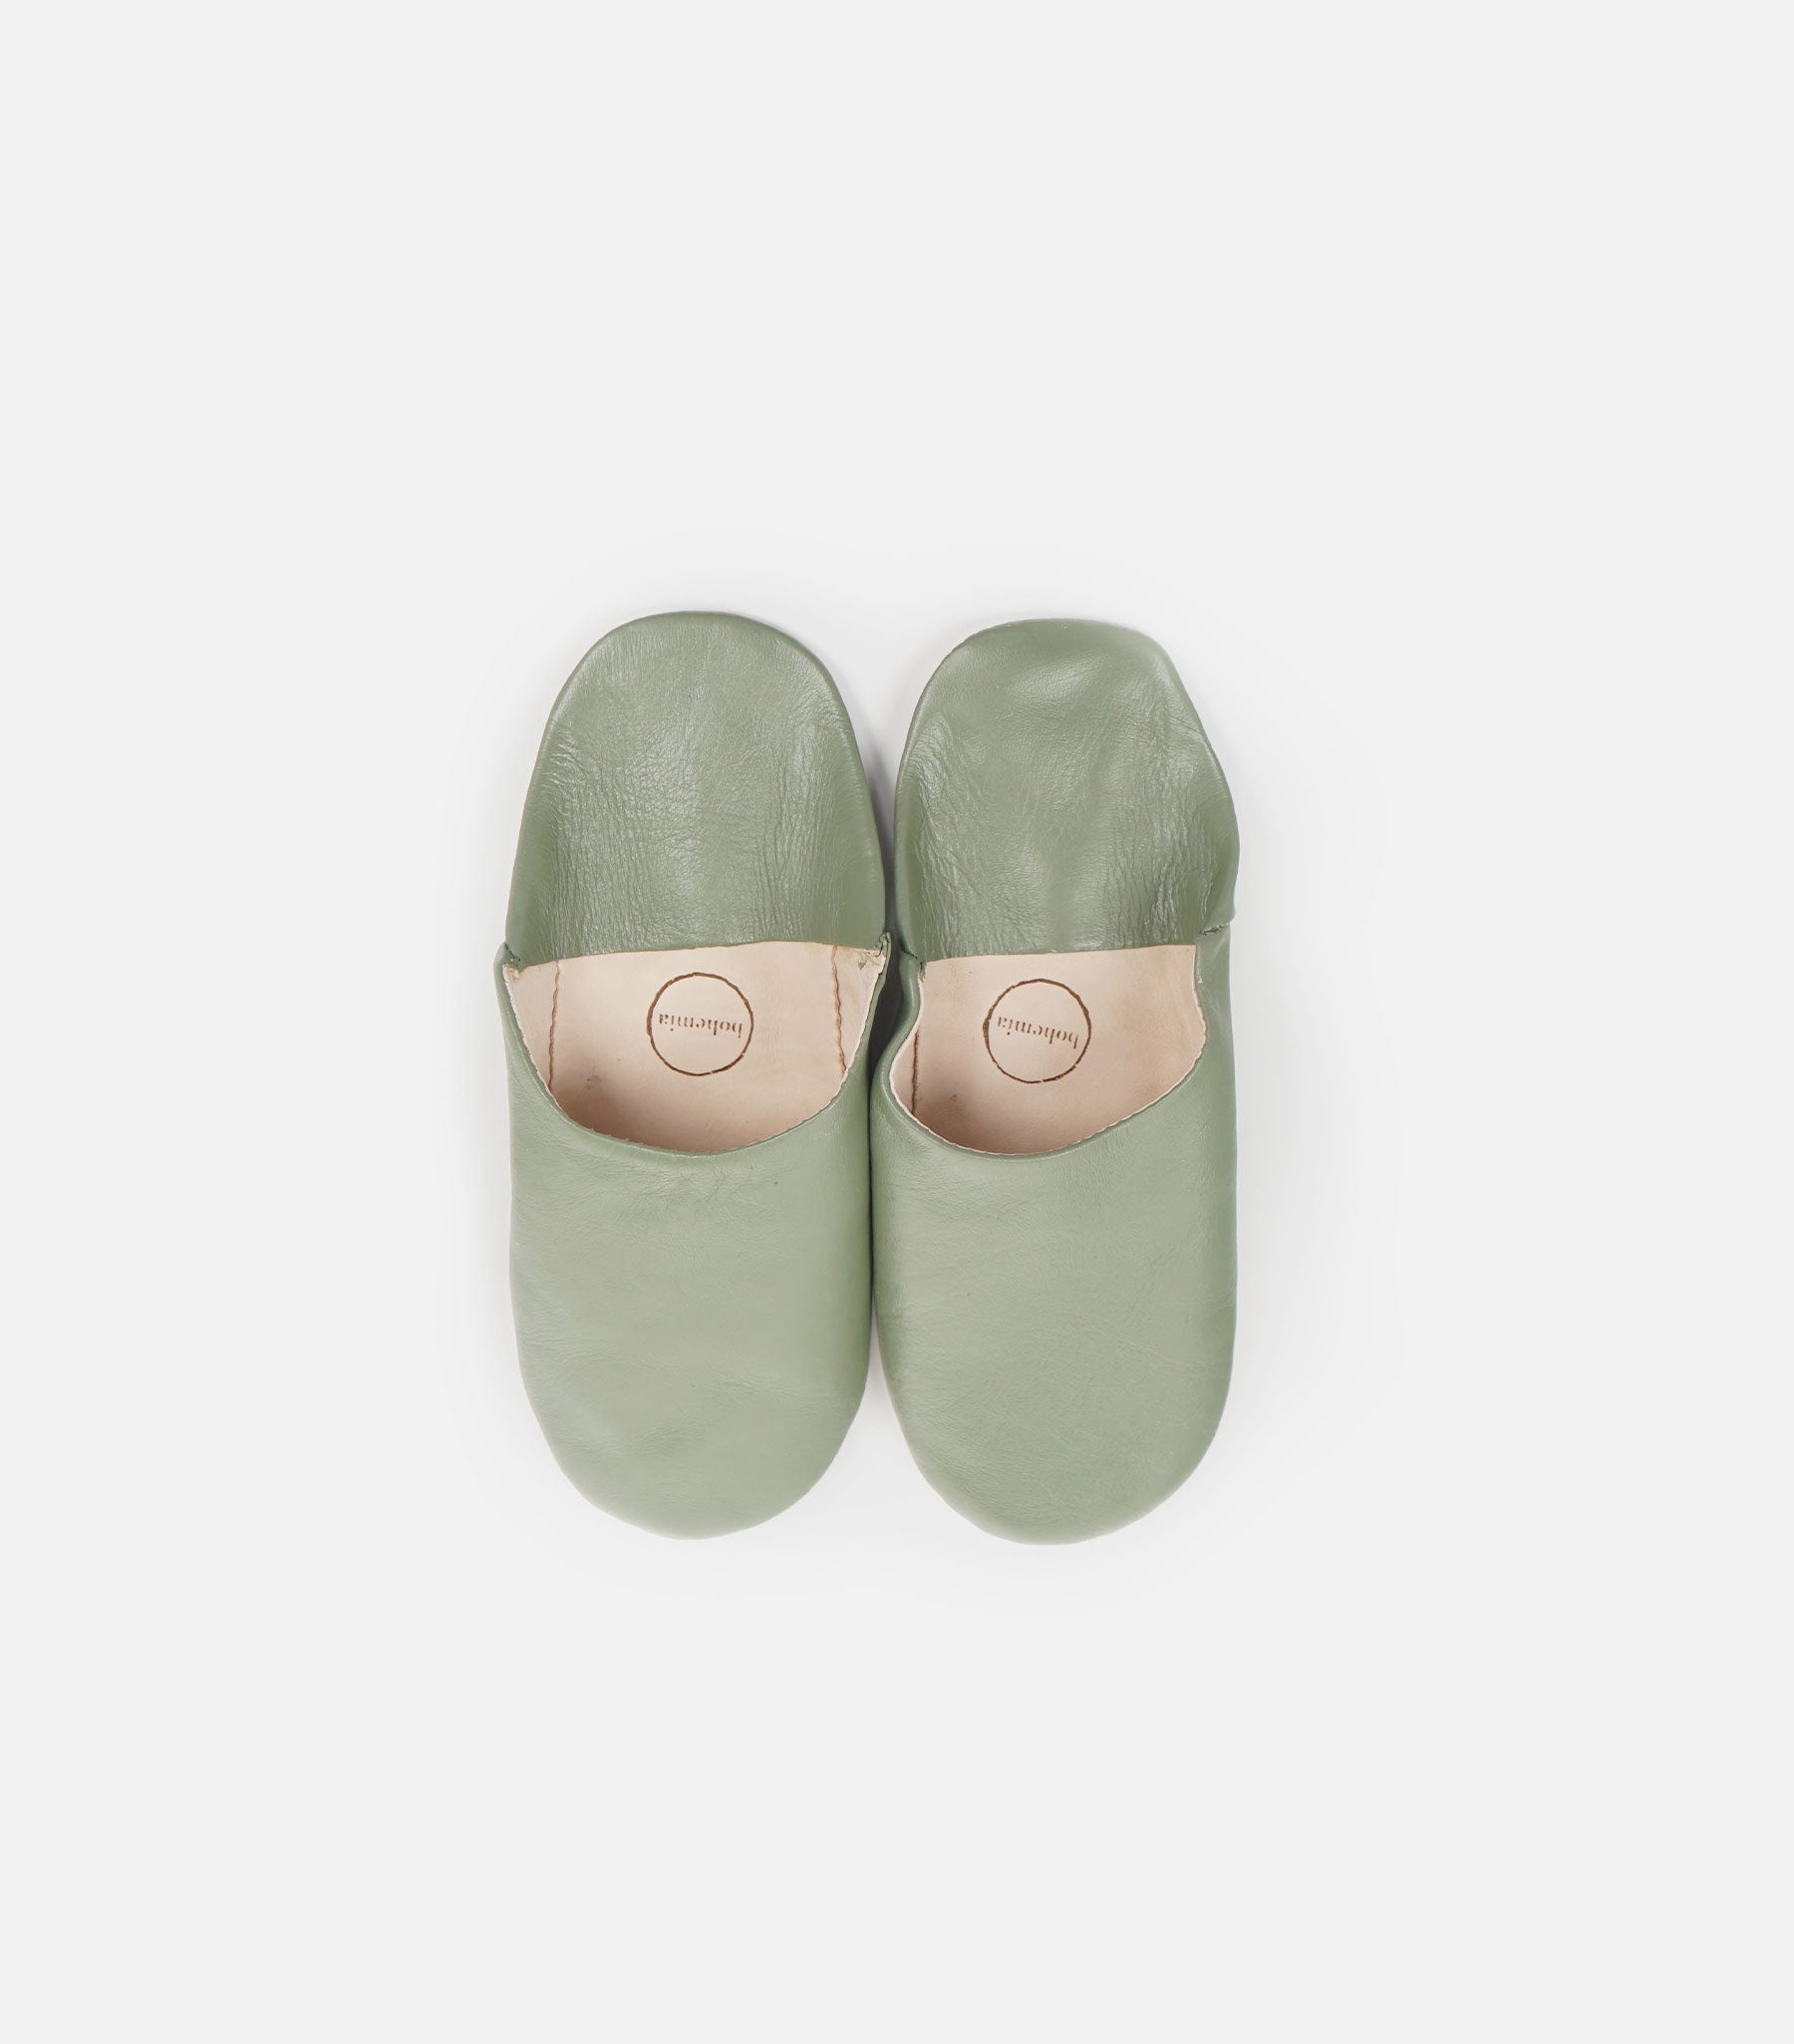 Moroccan Babouche Basic Slippers, Olive